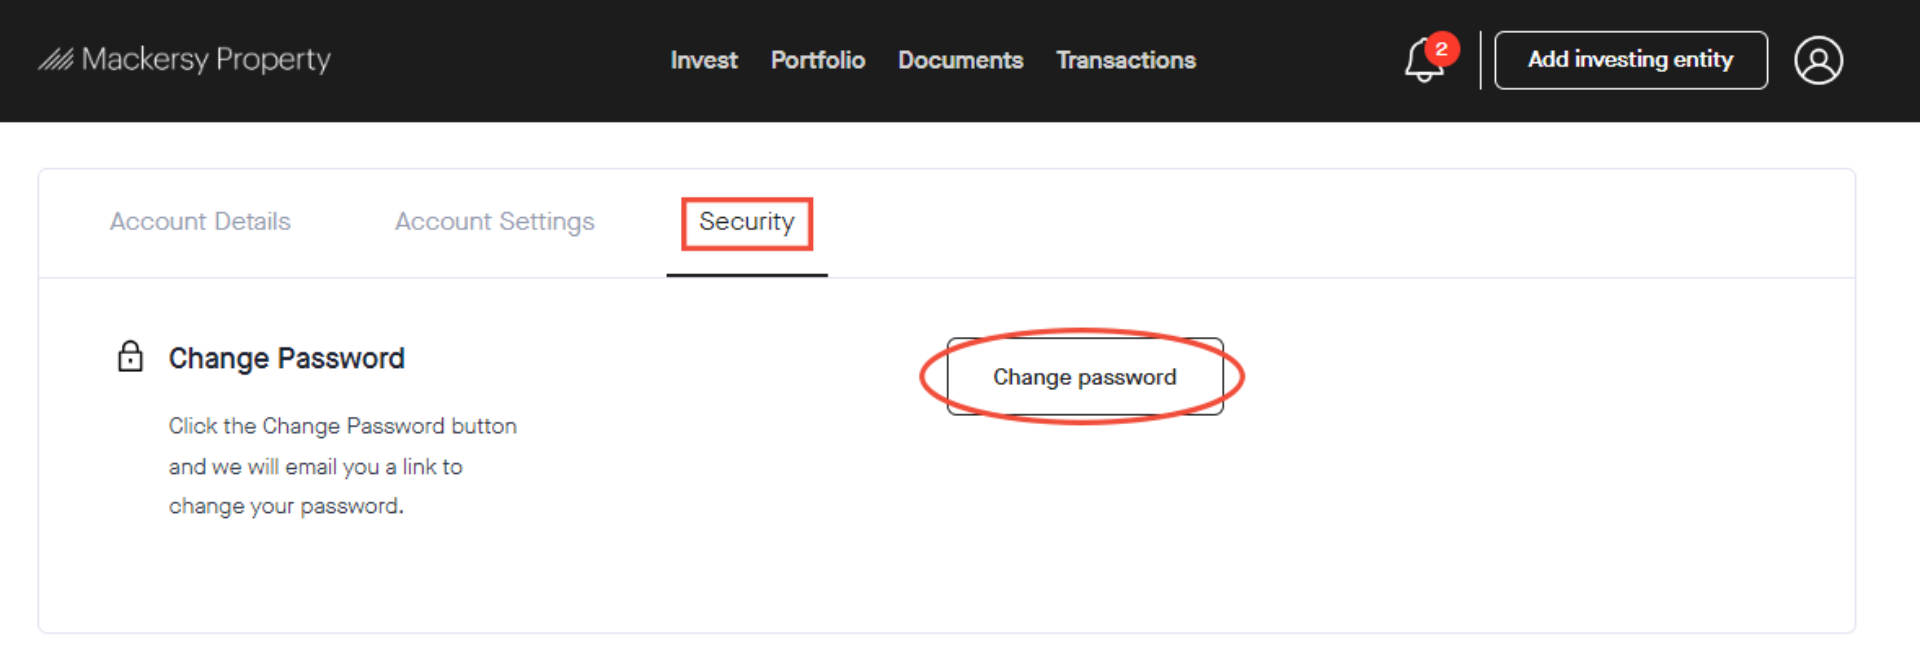 How do I update my details 4 security Box